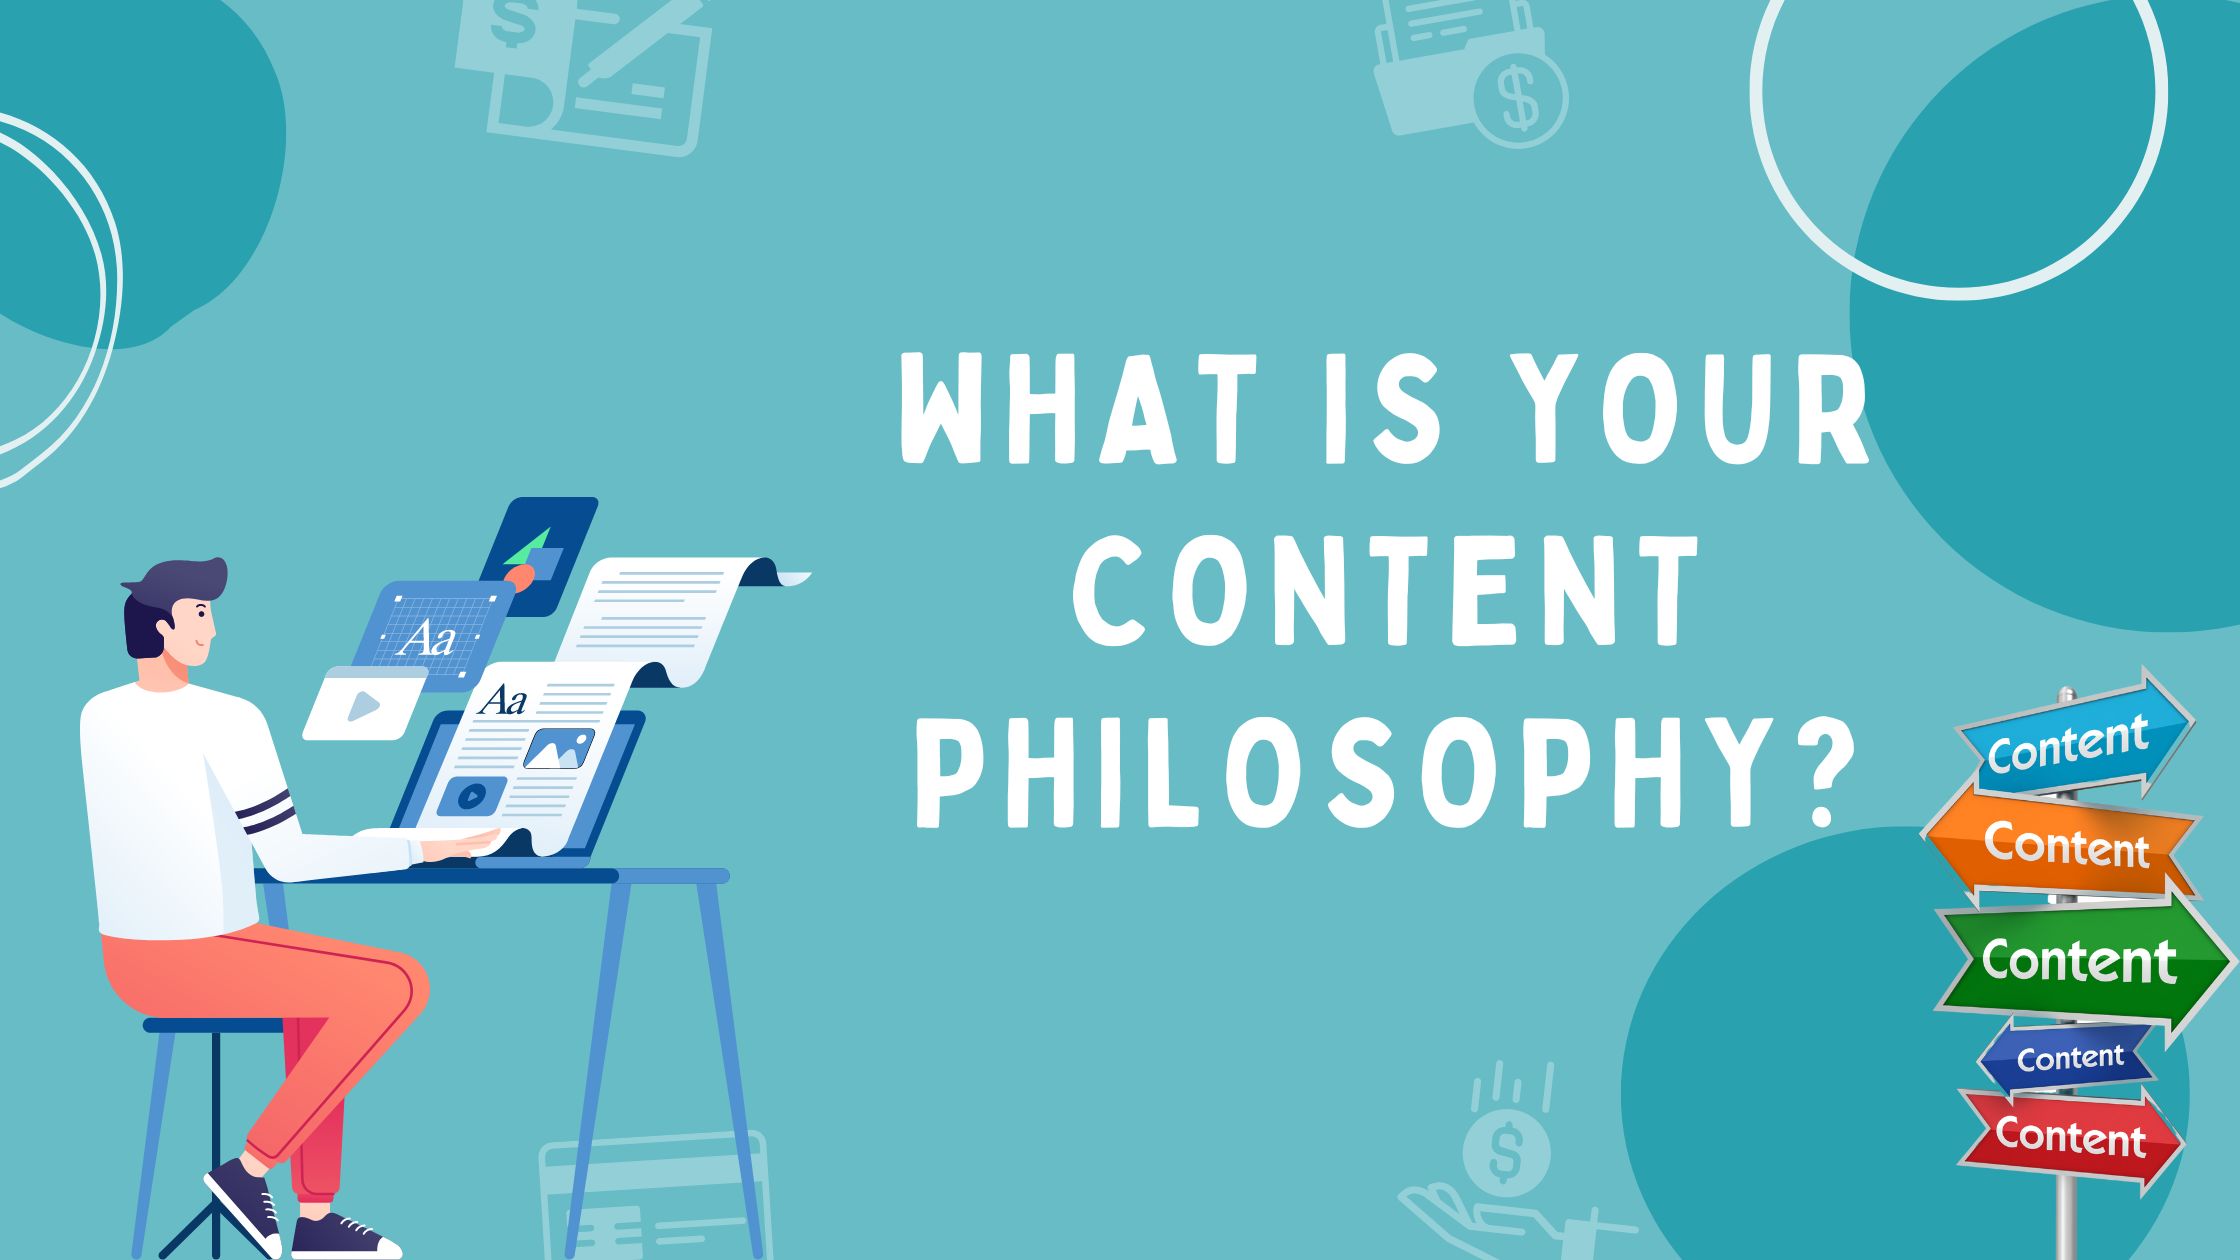 What is your content philosophy?